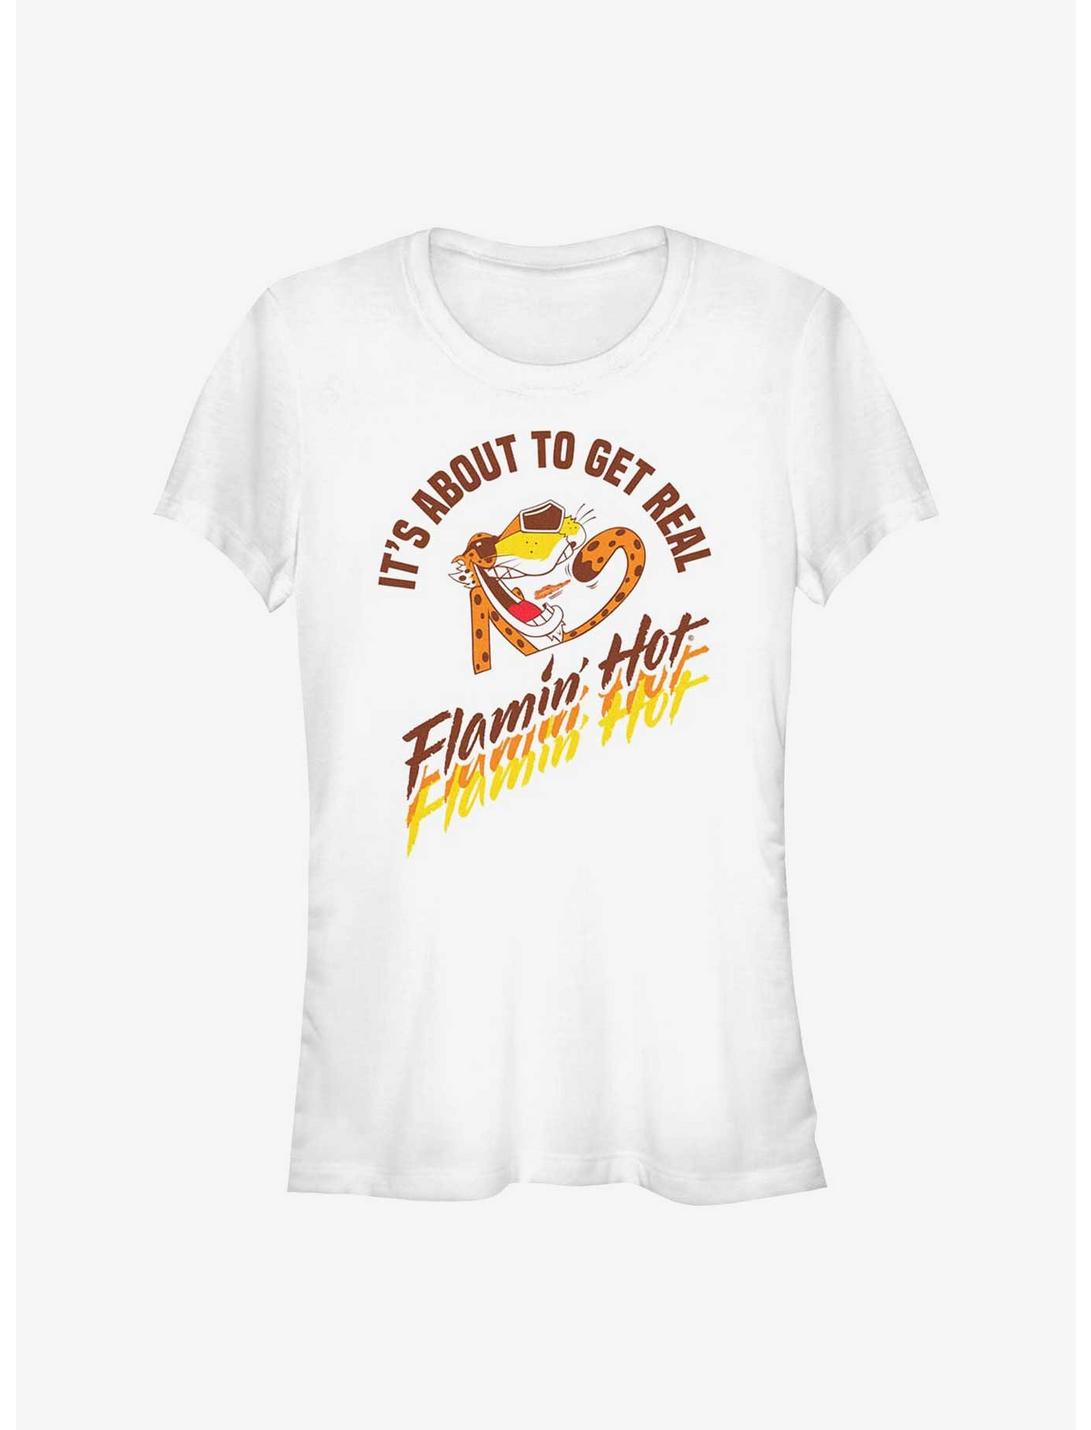 Cheetos It's About To Get Real Flamin Hot Girls T-Shirt, WHITE, hi-res